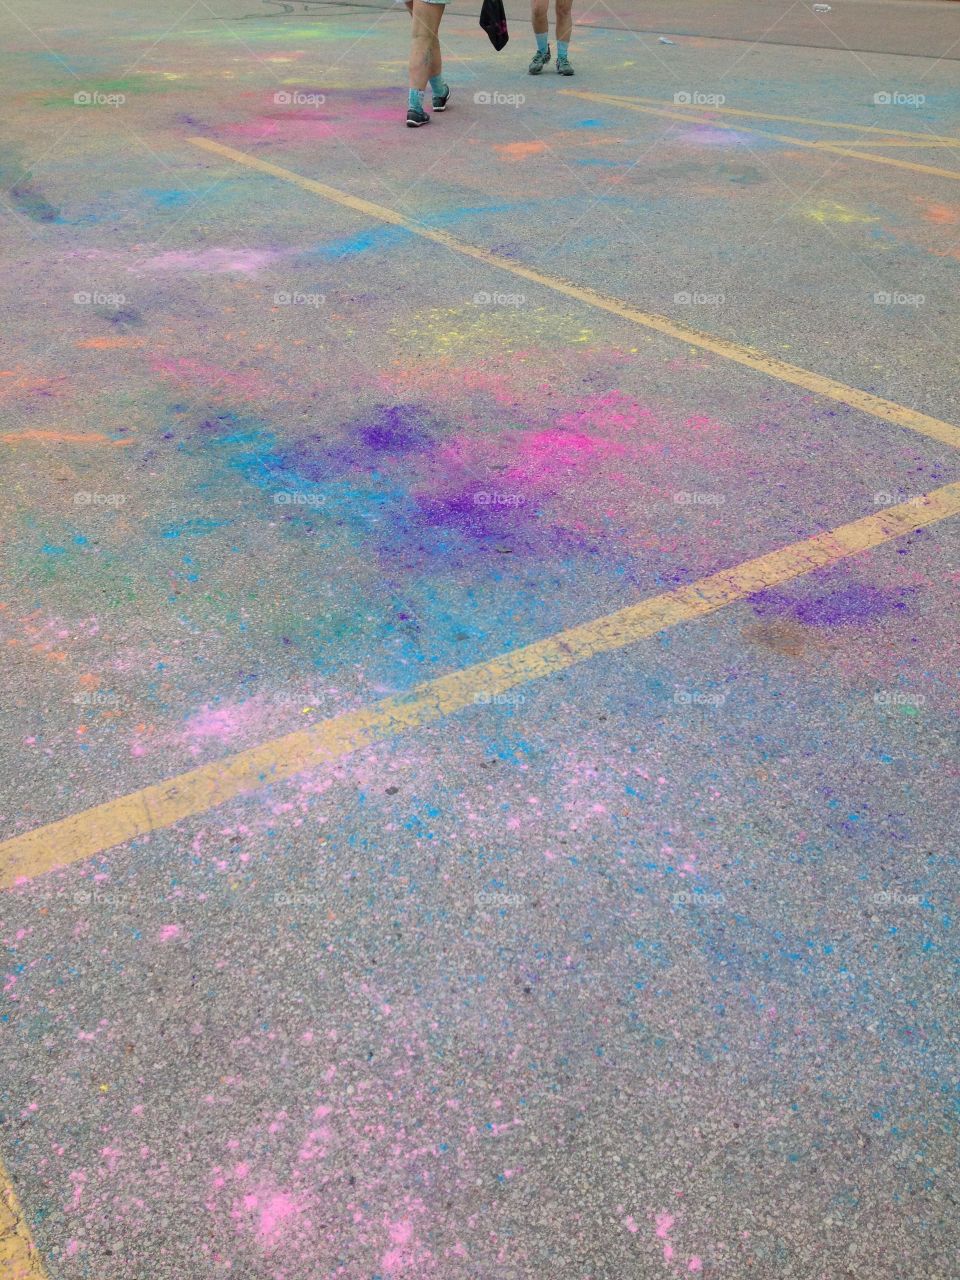 Parking lot after the Run or Dye